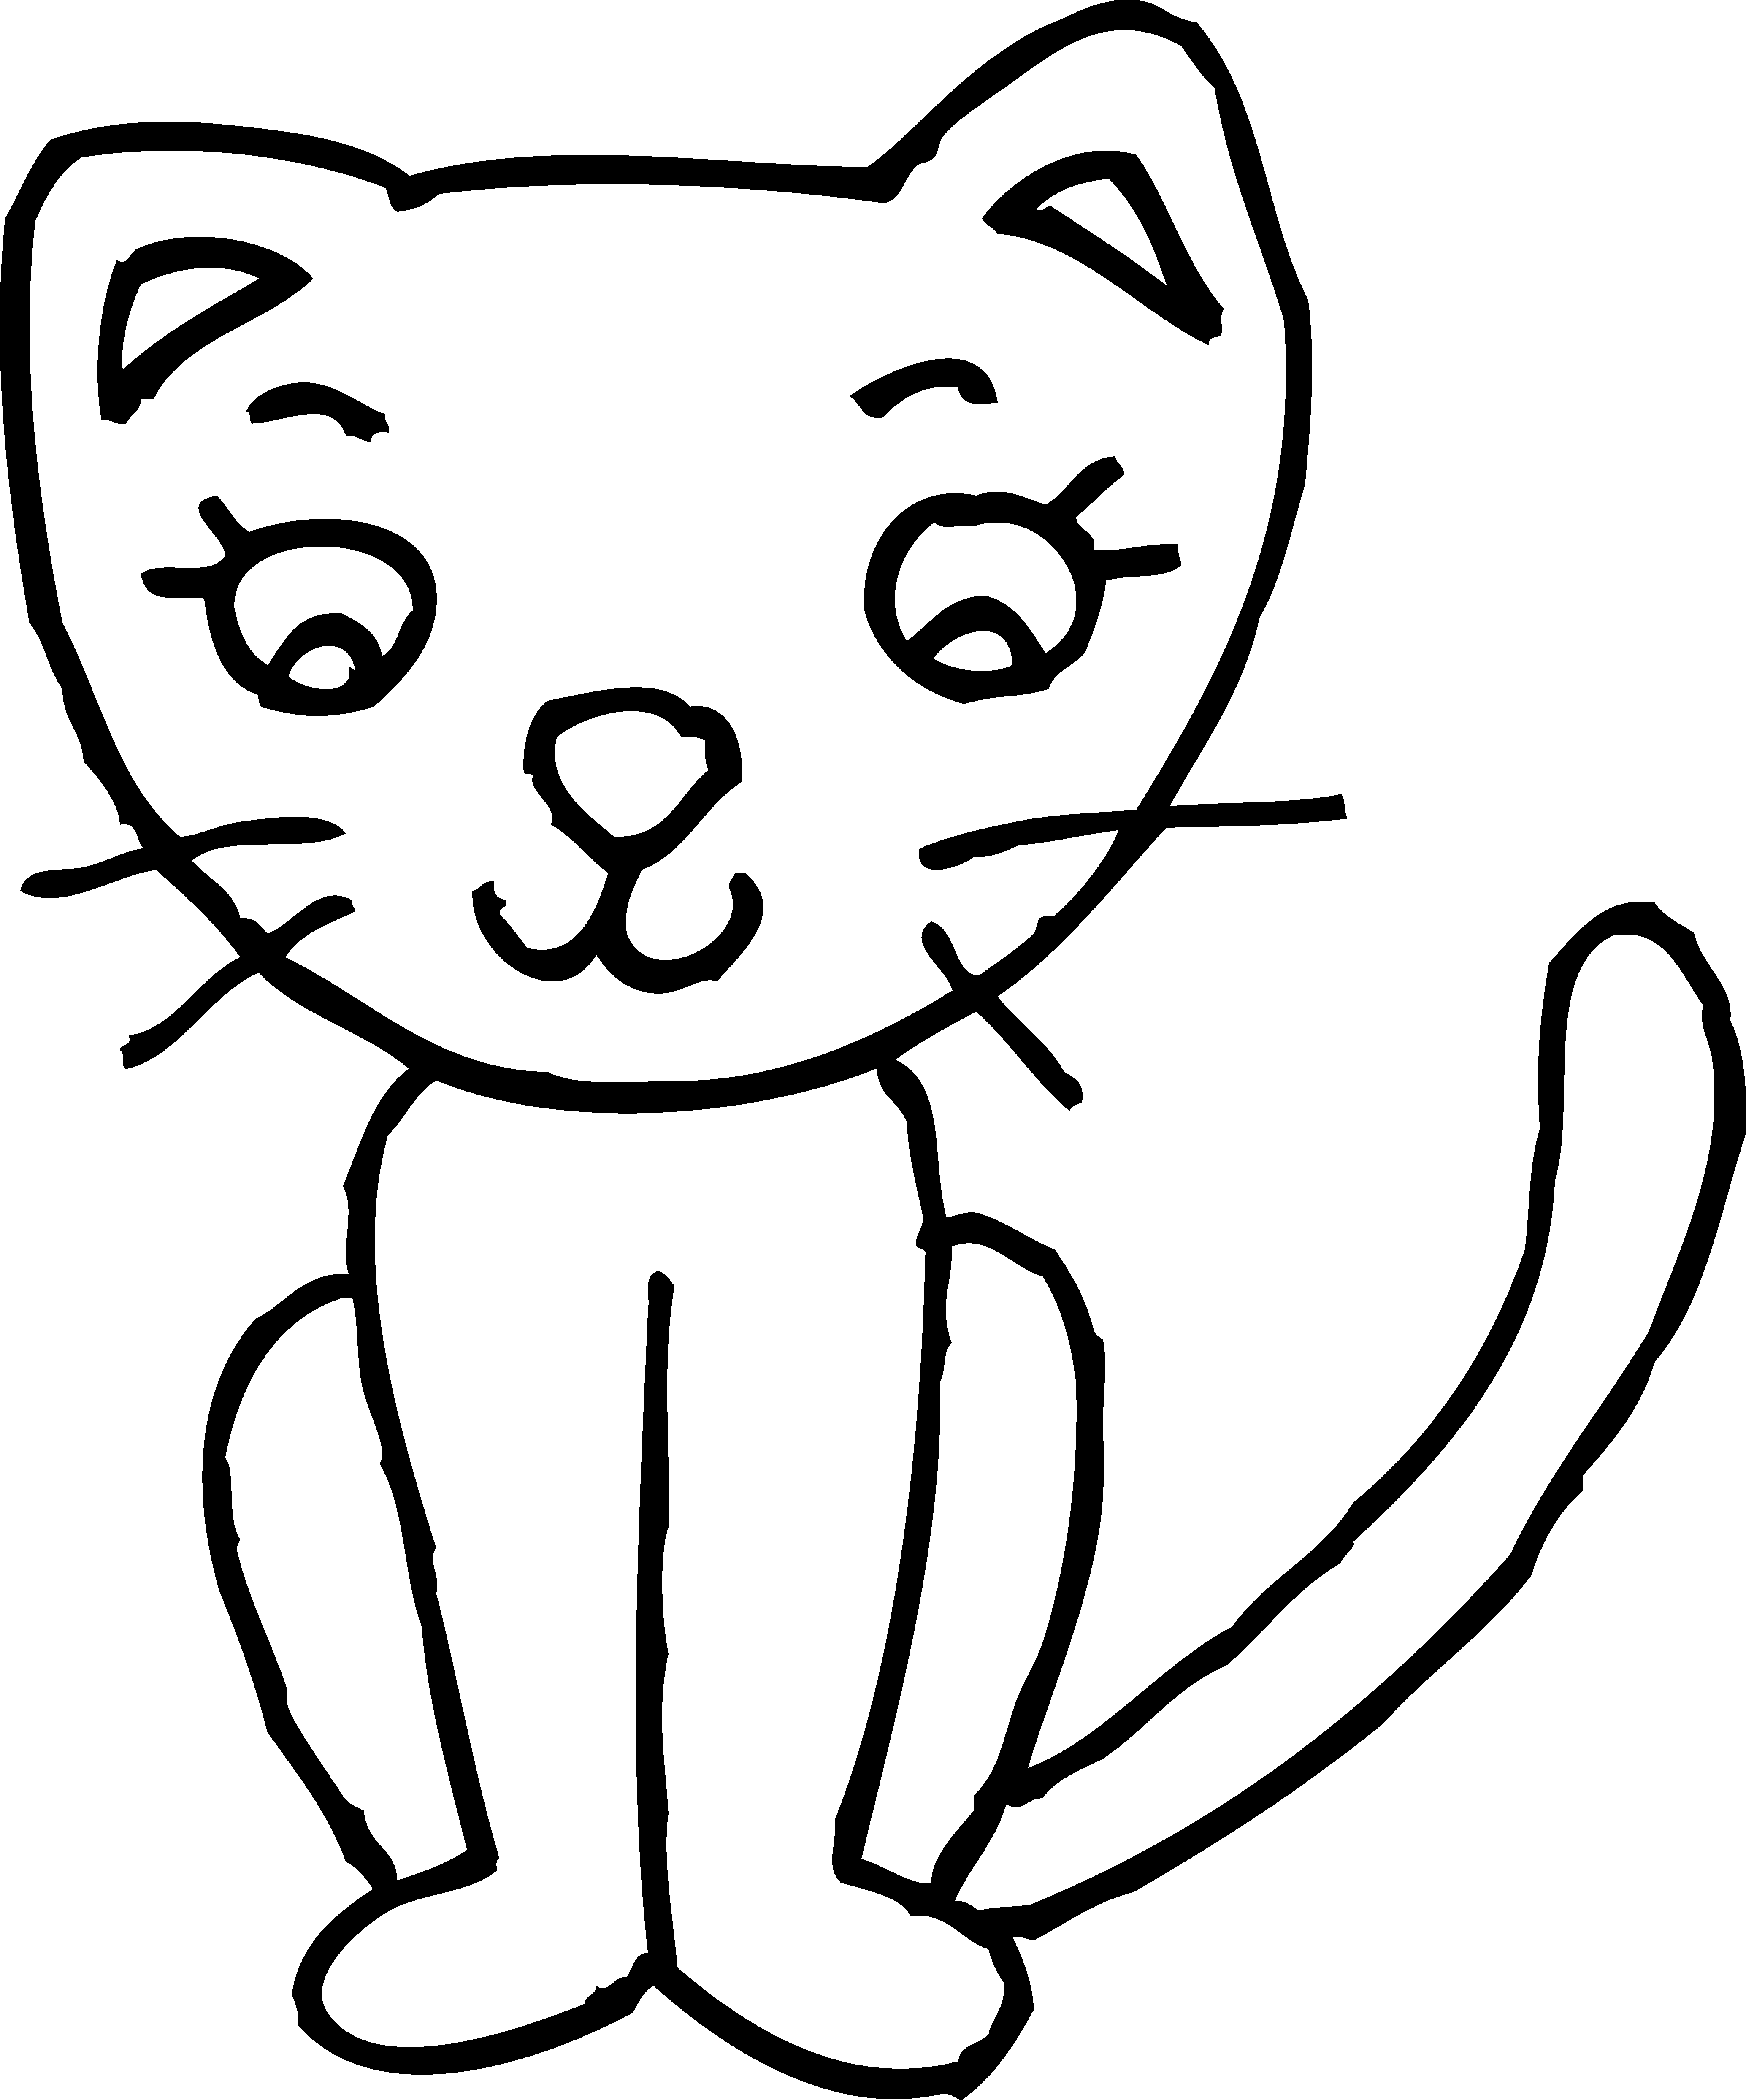 Clip art black and. Cat clipart easy